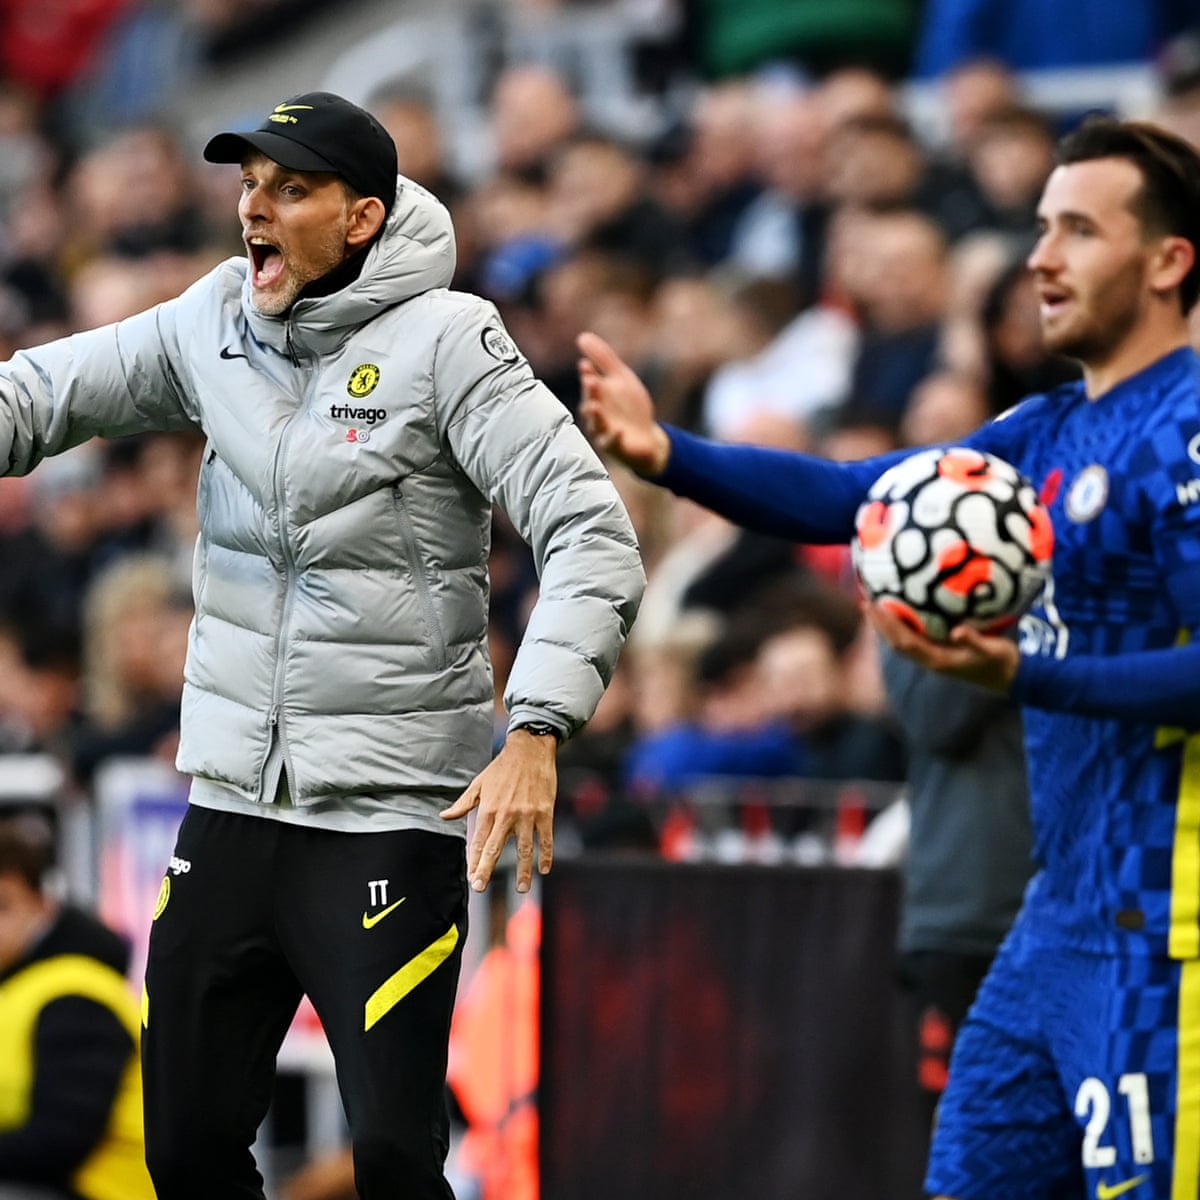 Thomas Tuchel keen to remain at Chelsea for the long-term | Chelsea | The Guardian